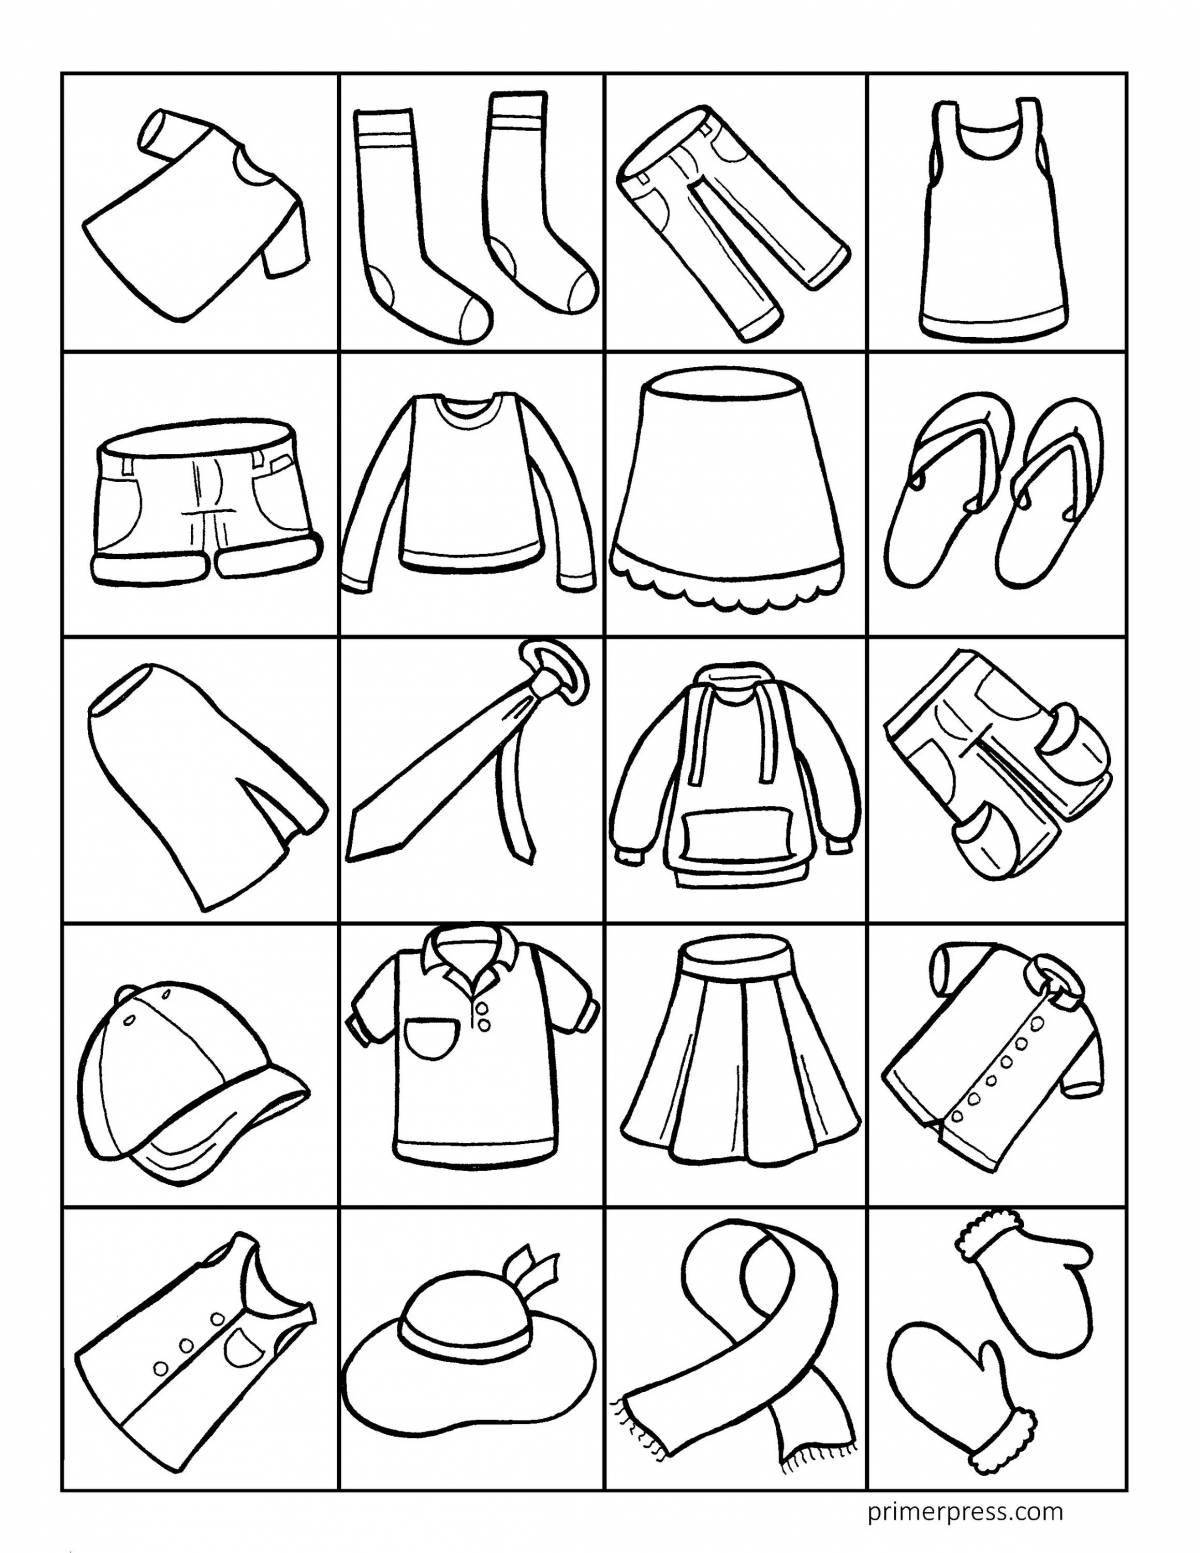 Colorful coloring page of clothes for kids